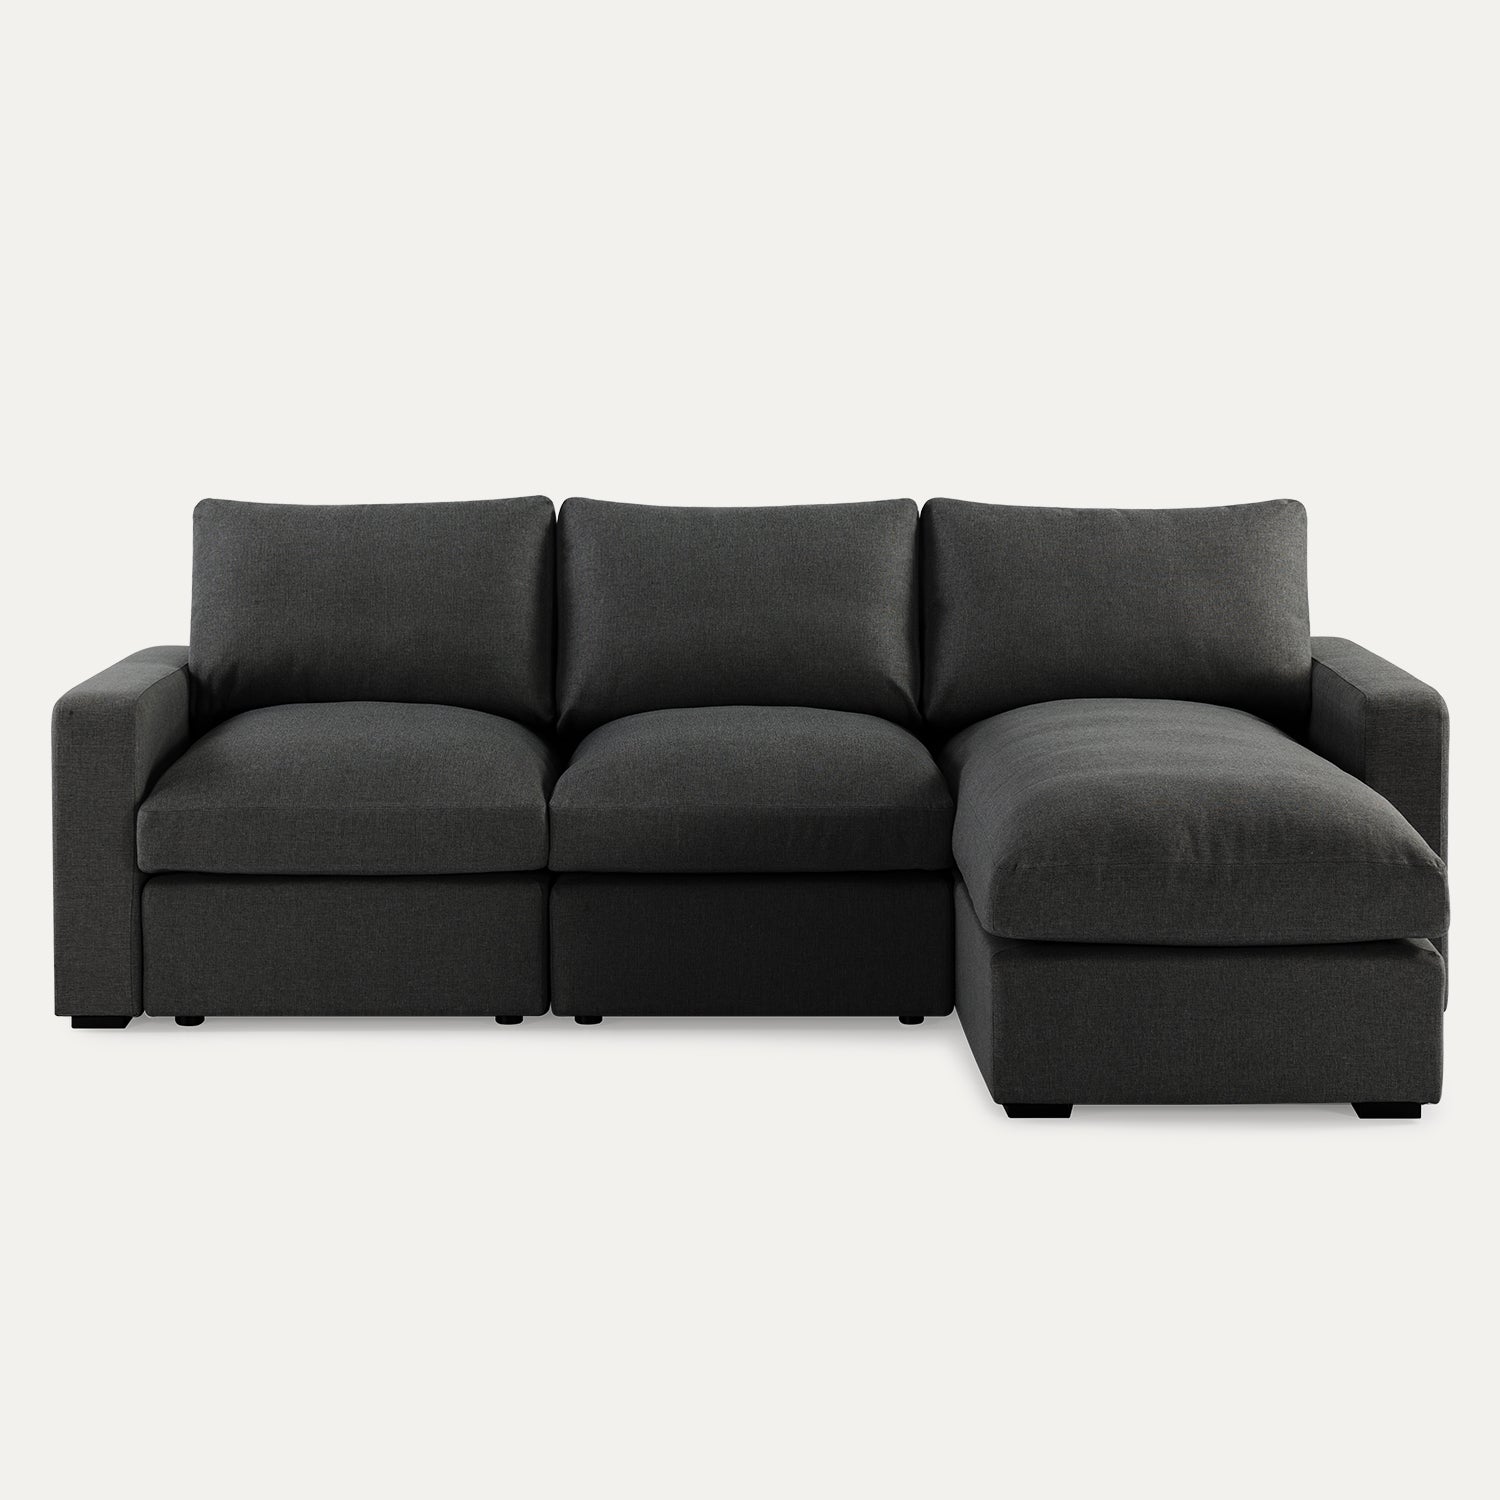 Jamison Reversible Chaise Sectional Sofa